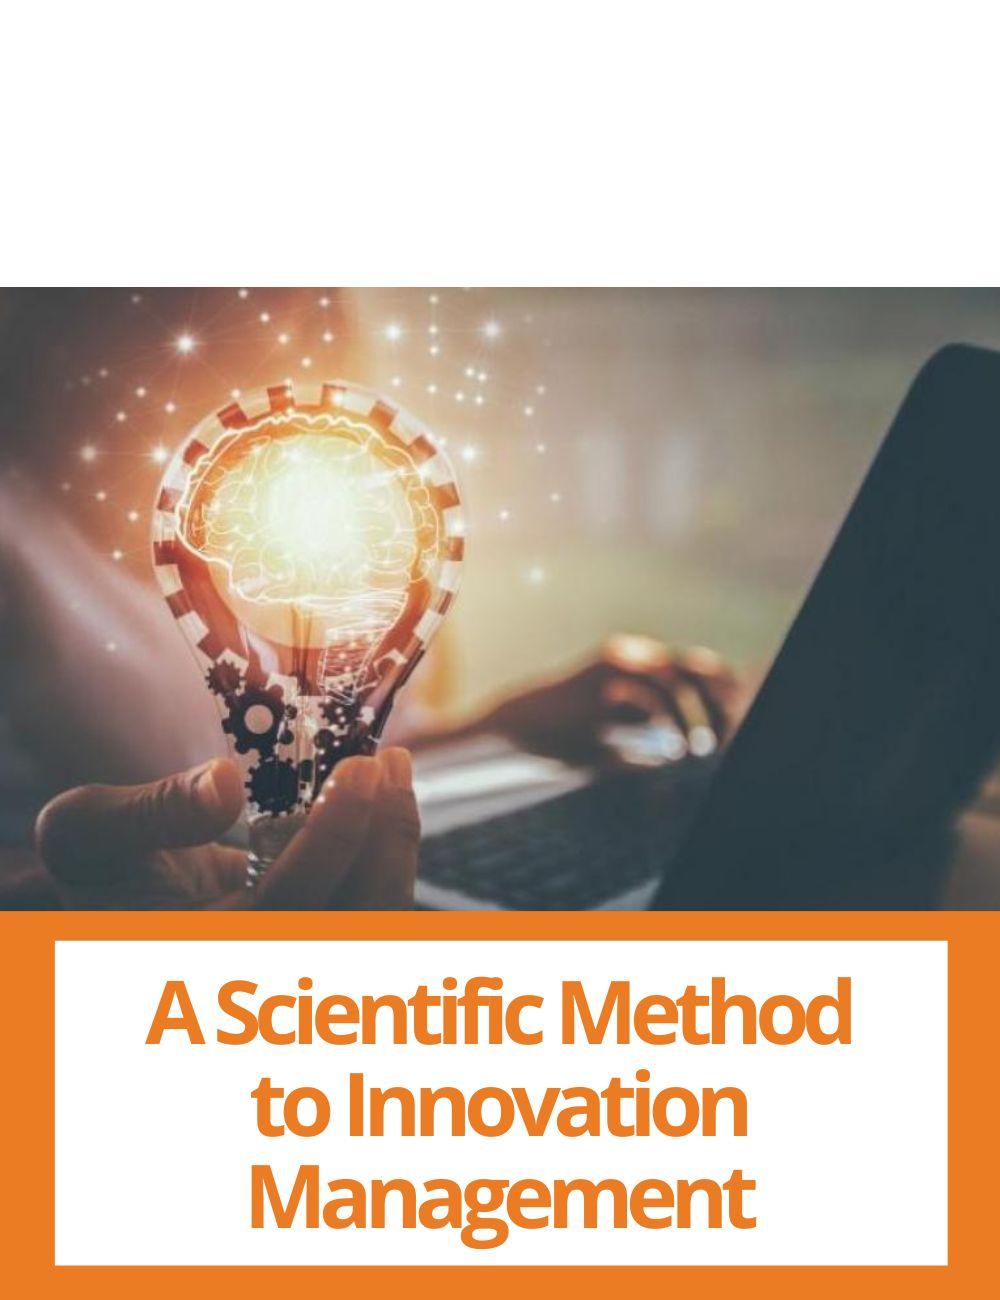 Link to related stories. Image: a bulb. Story headline: A Scientific Method to Innovation Management